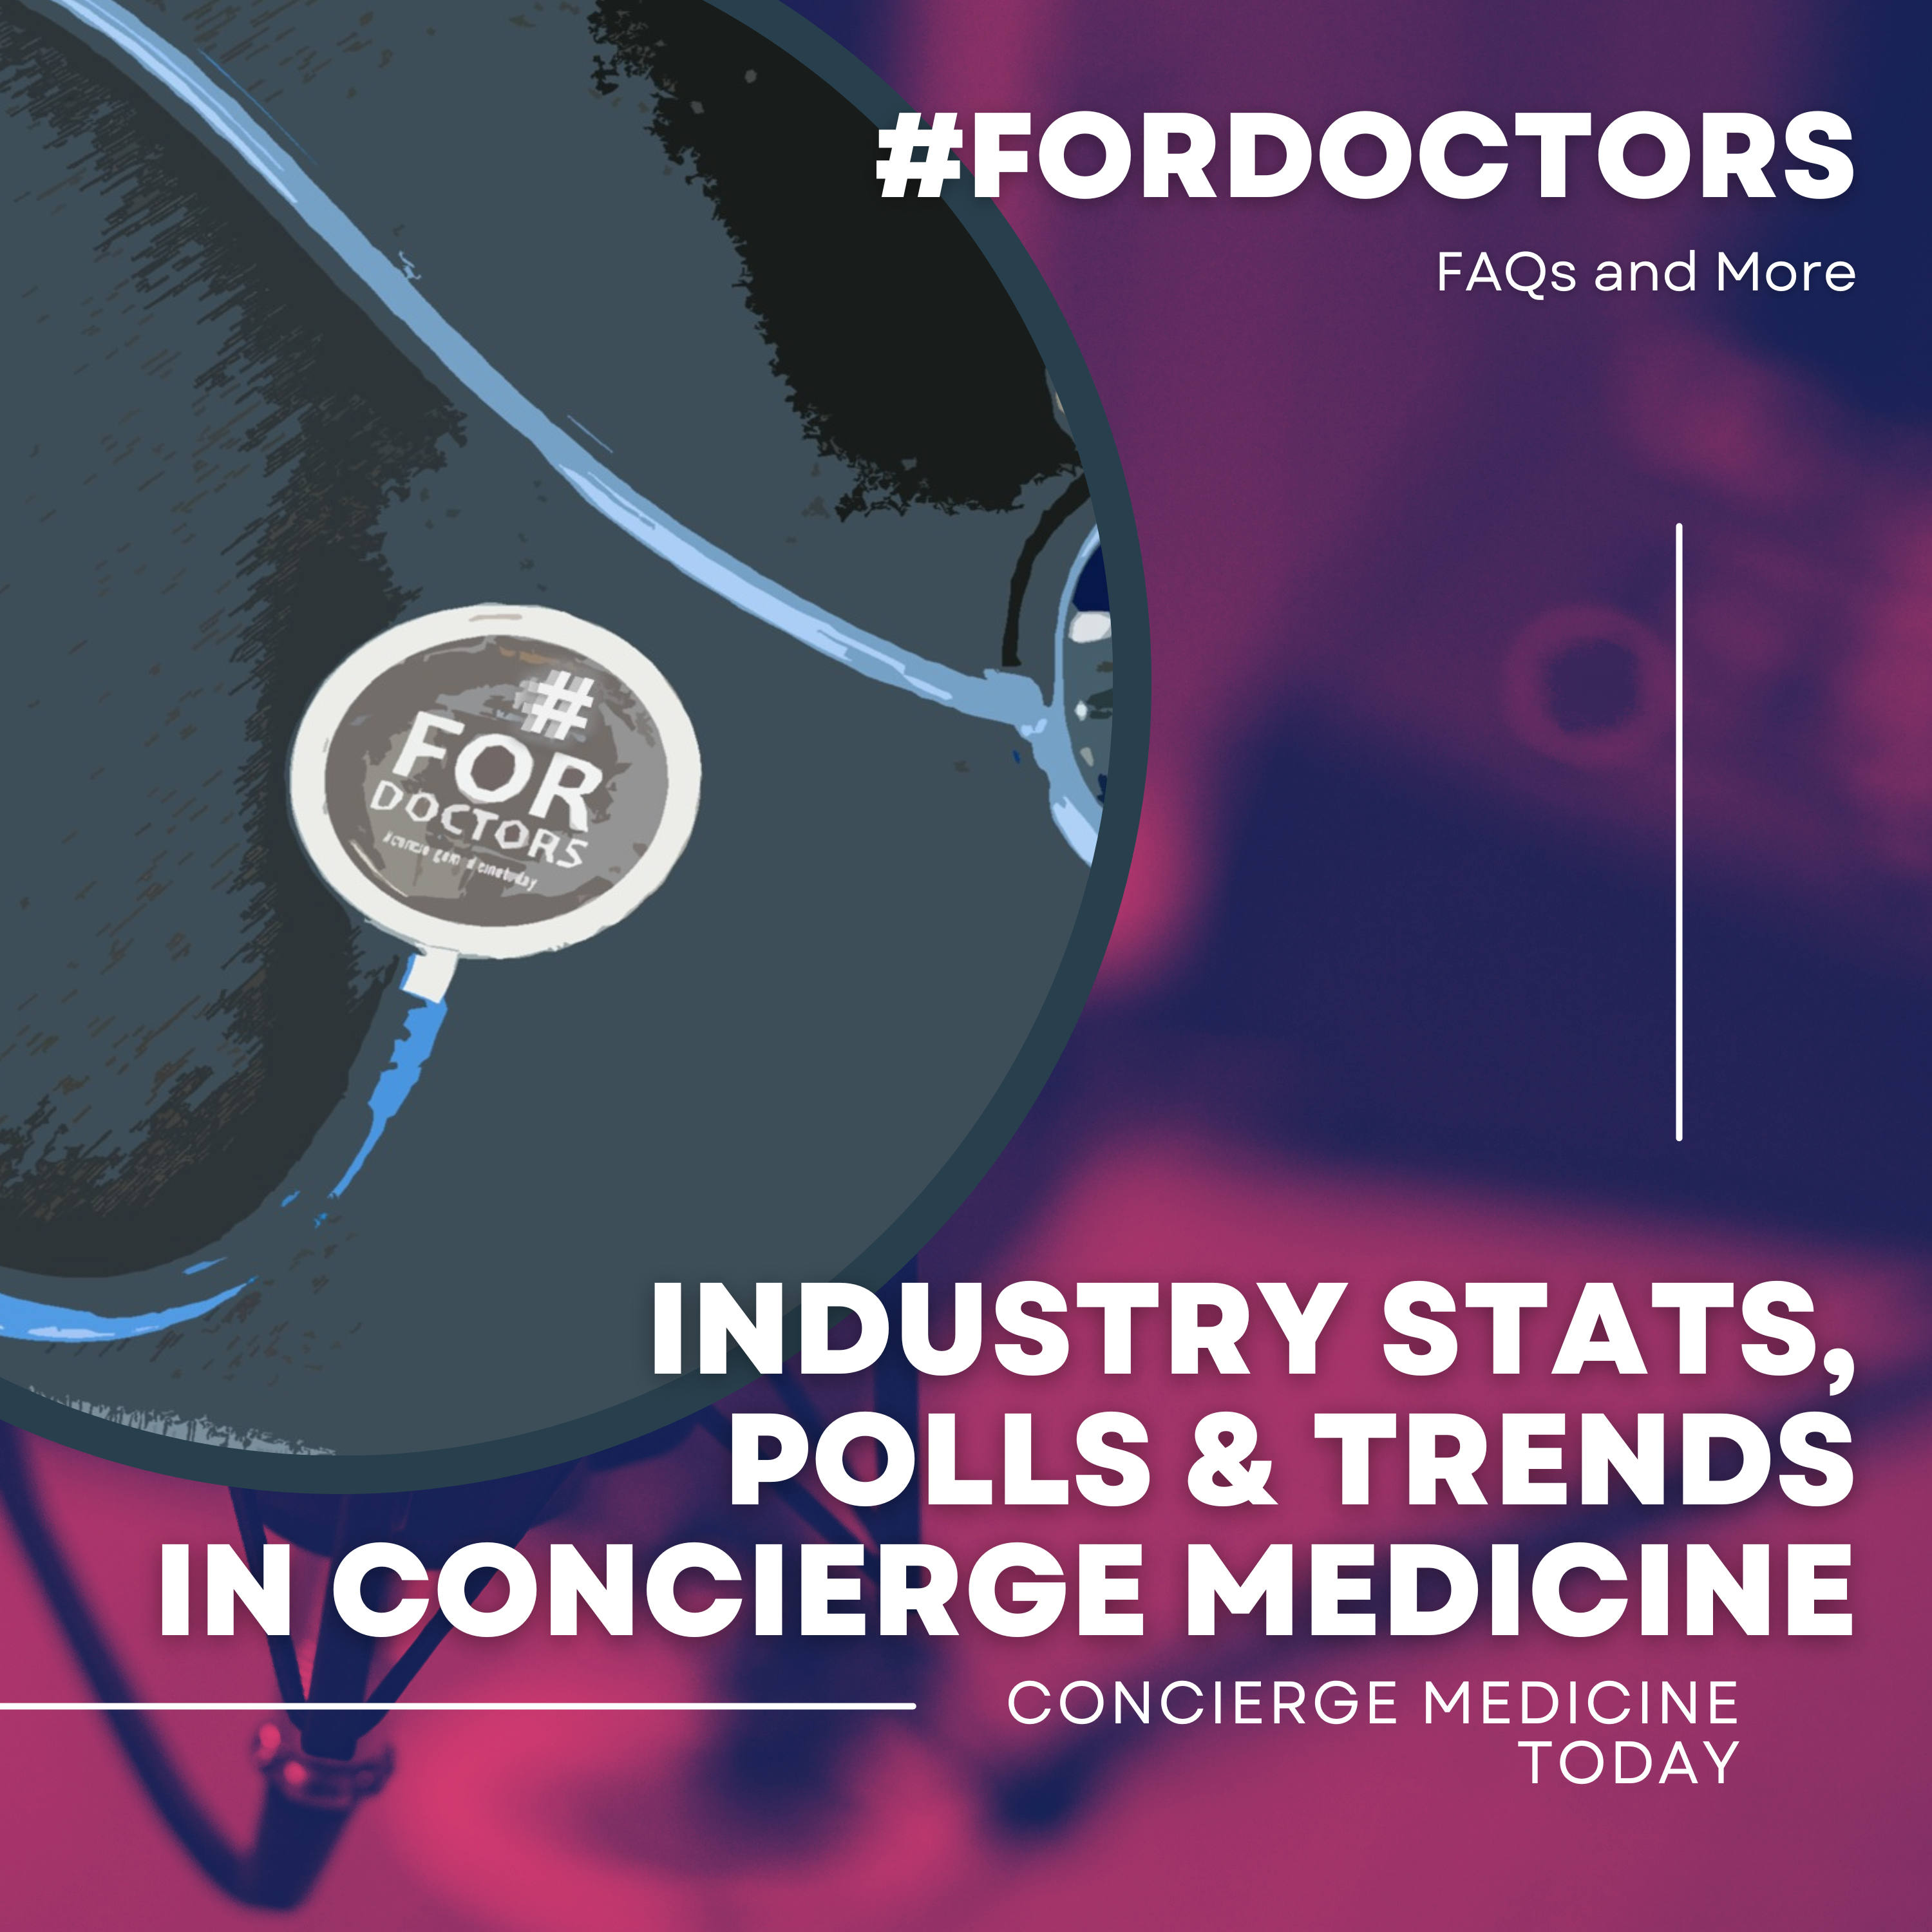 What Do Less Than Six Percent of Concierge Doctors Do Different?